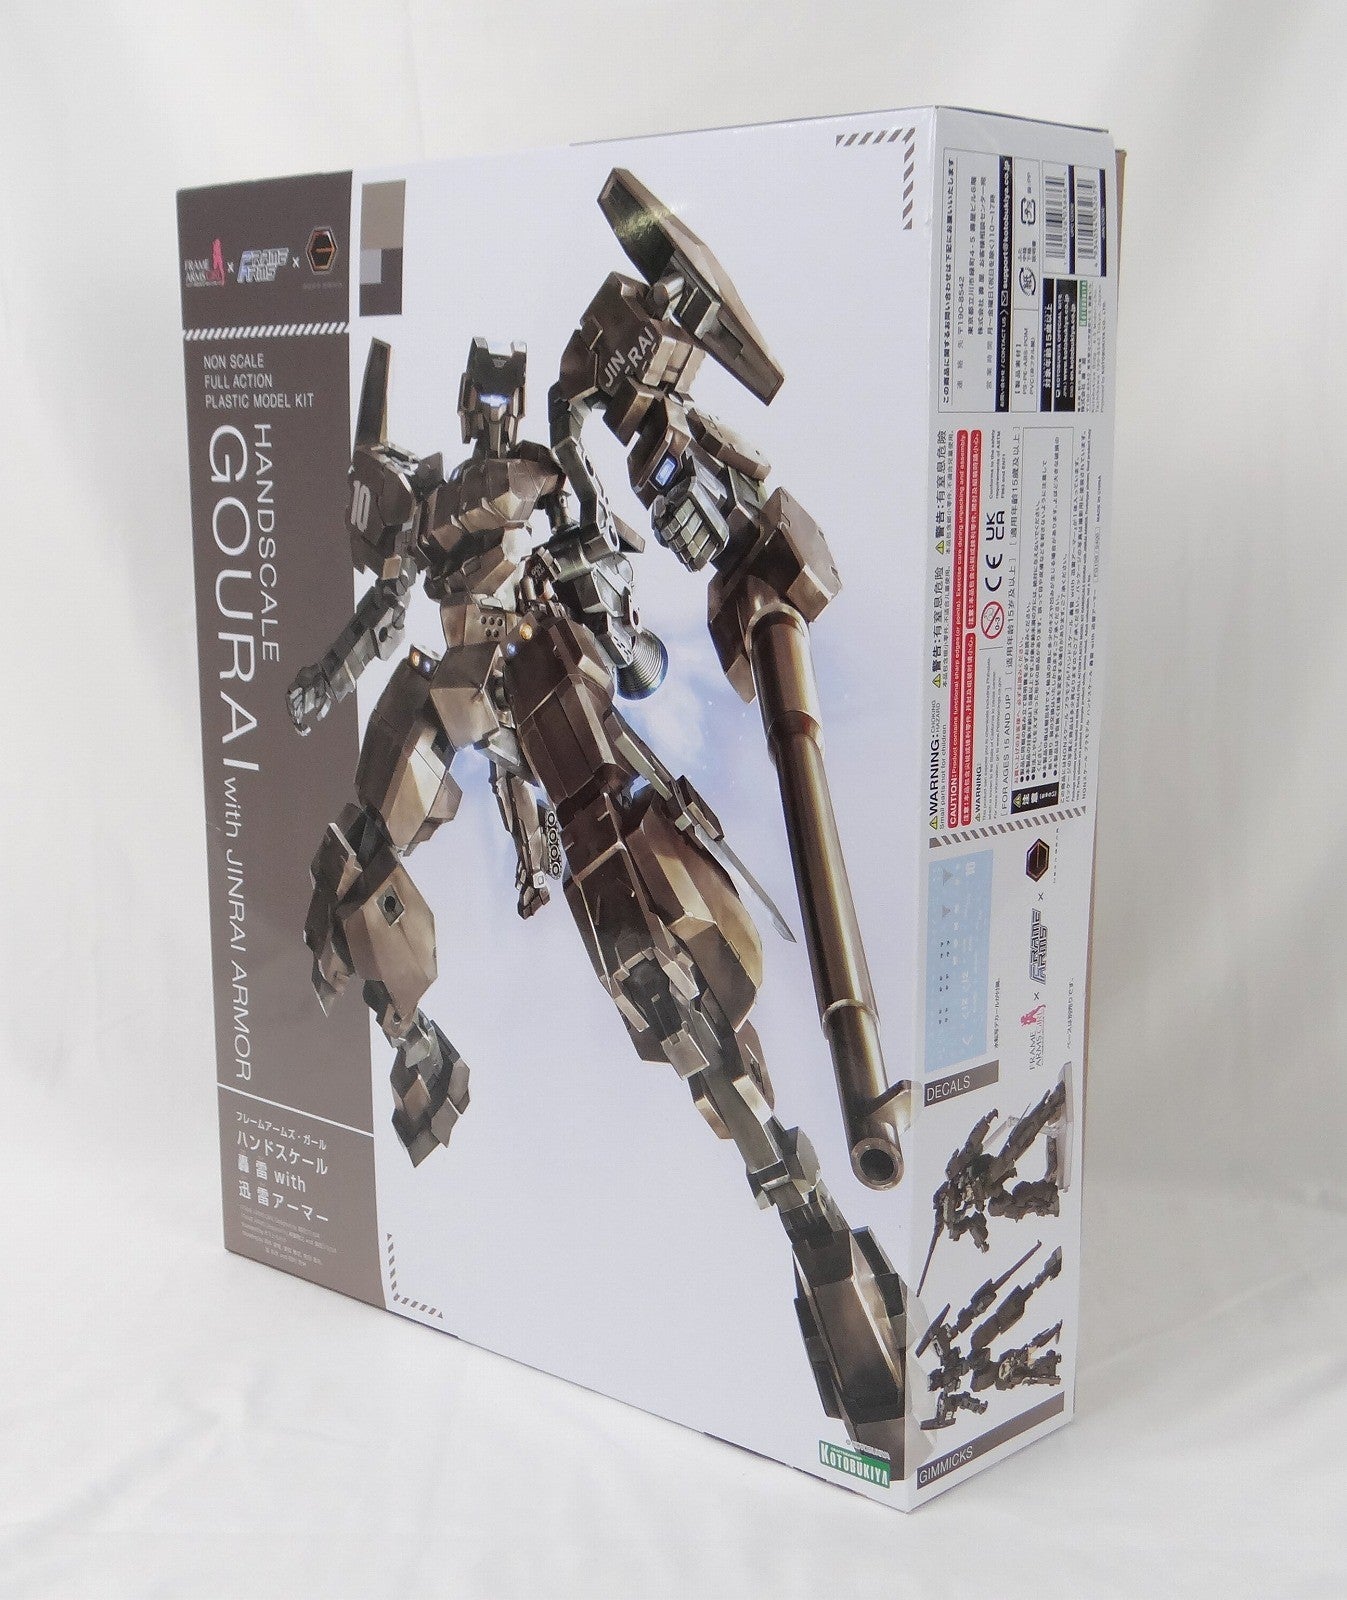 Frame Arms Girl Hand Scale Gourai with Jinrai Armor Plastic Model